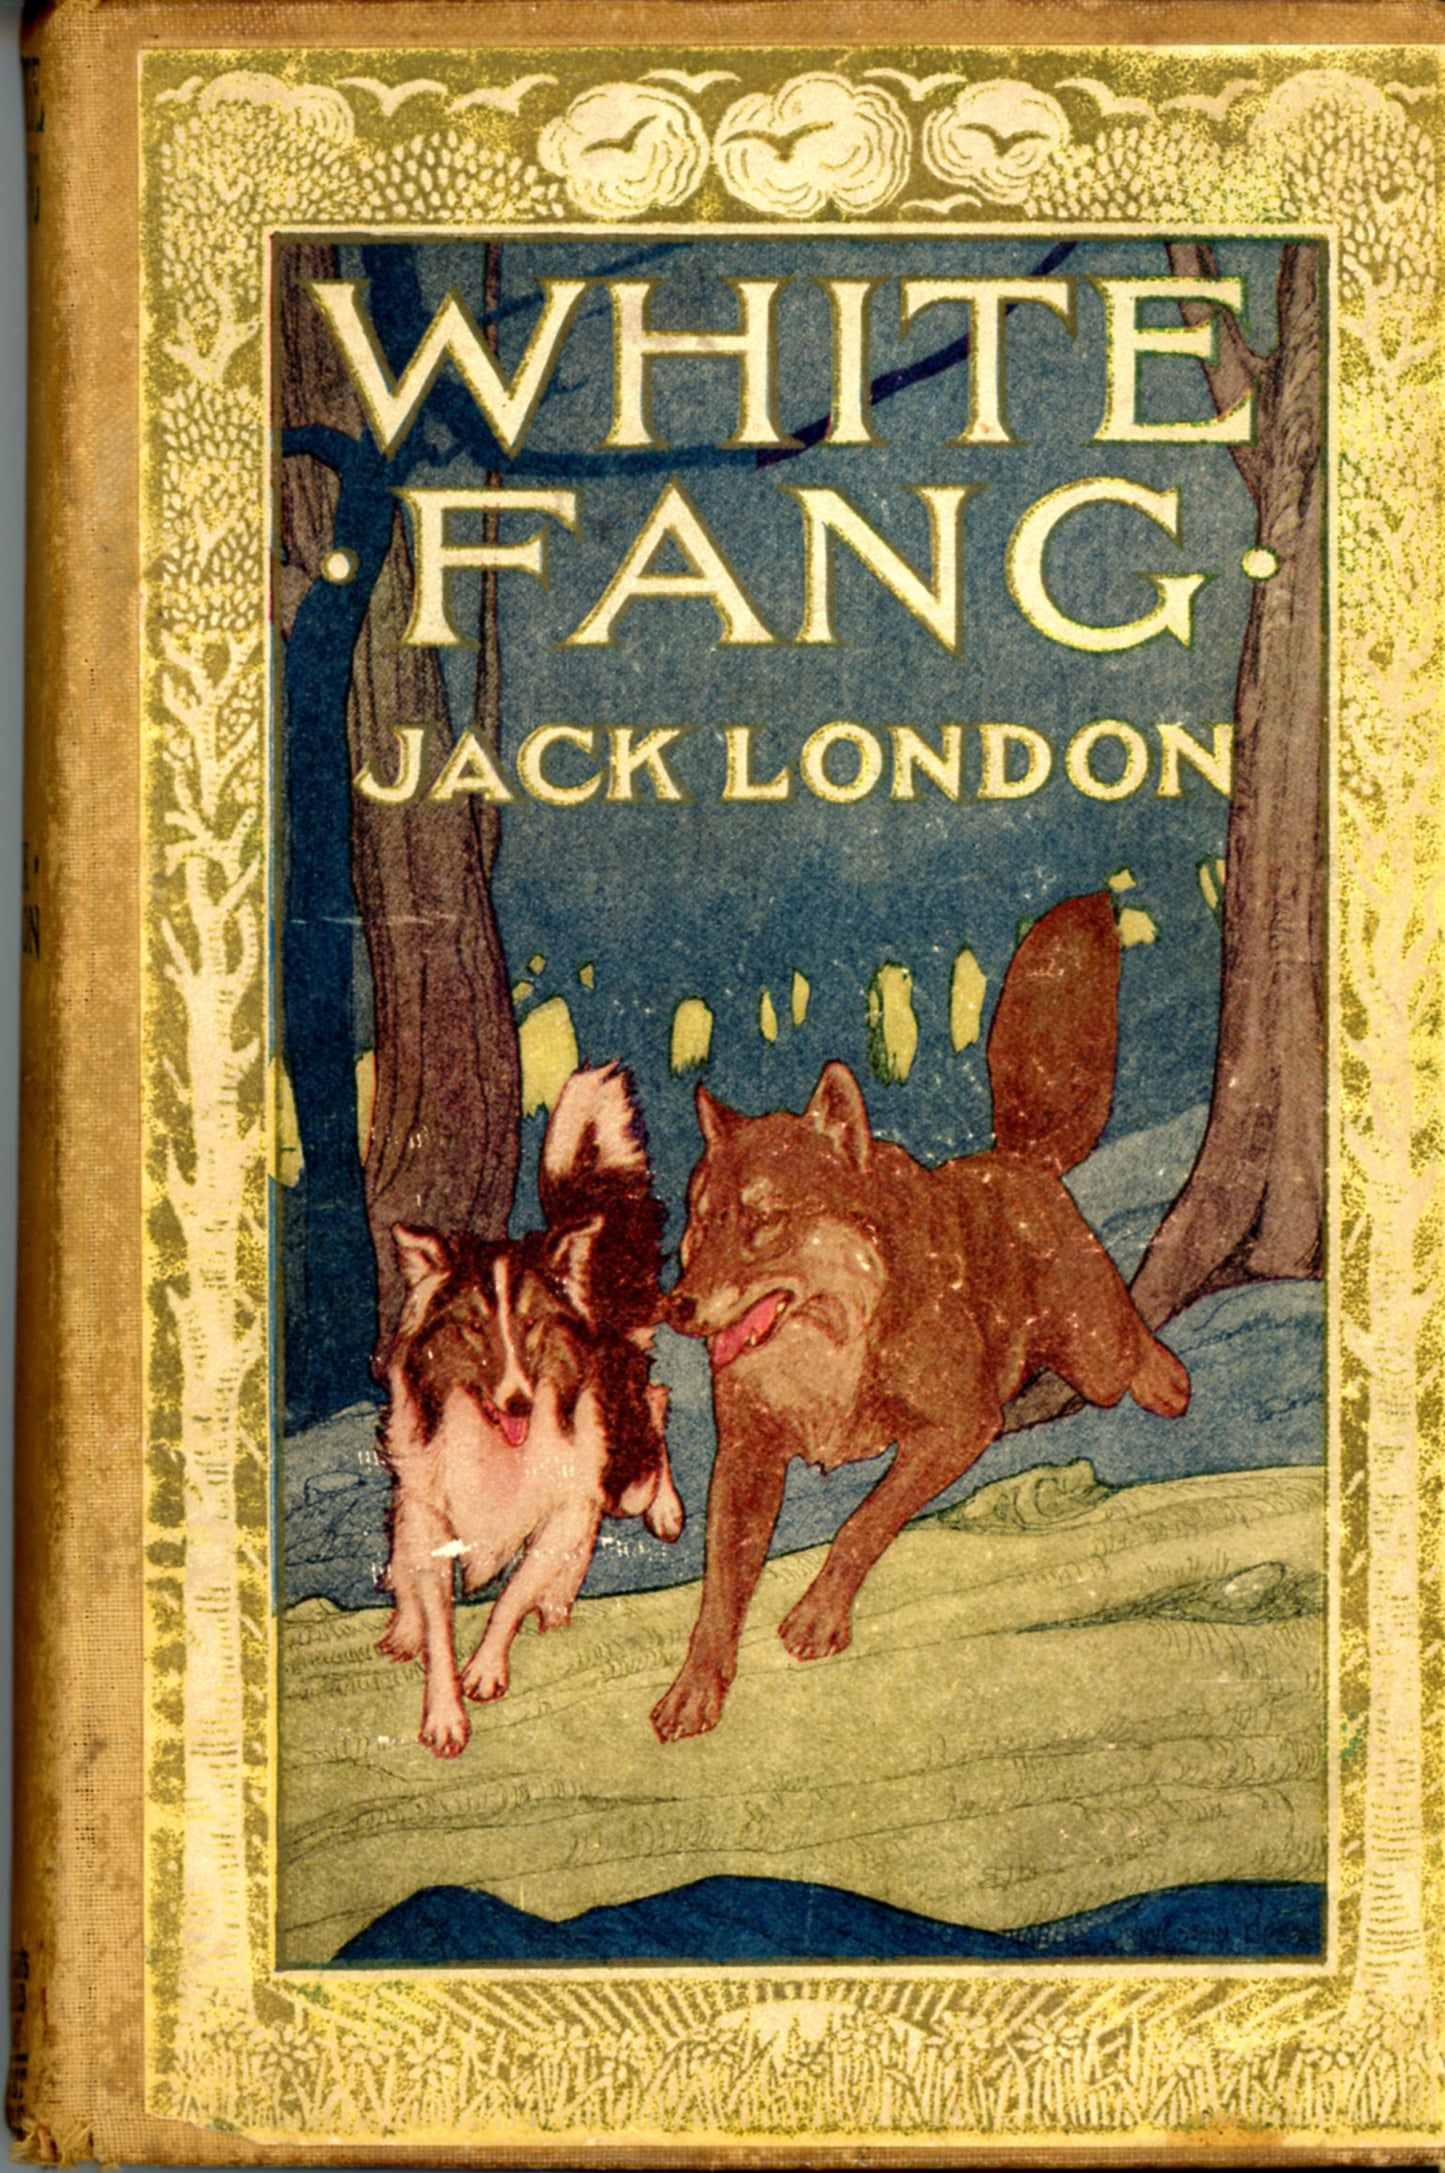 WHITE FANG by Jack London Published by The Macmillan Company 1912 ©1906